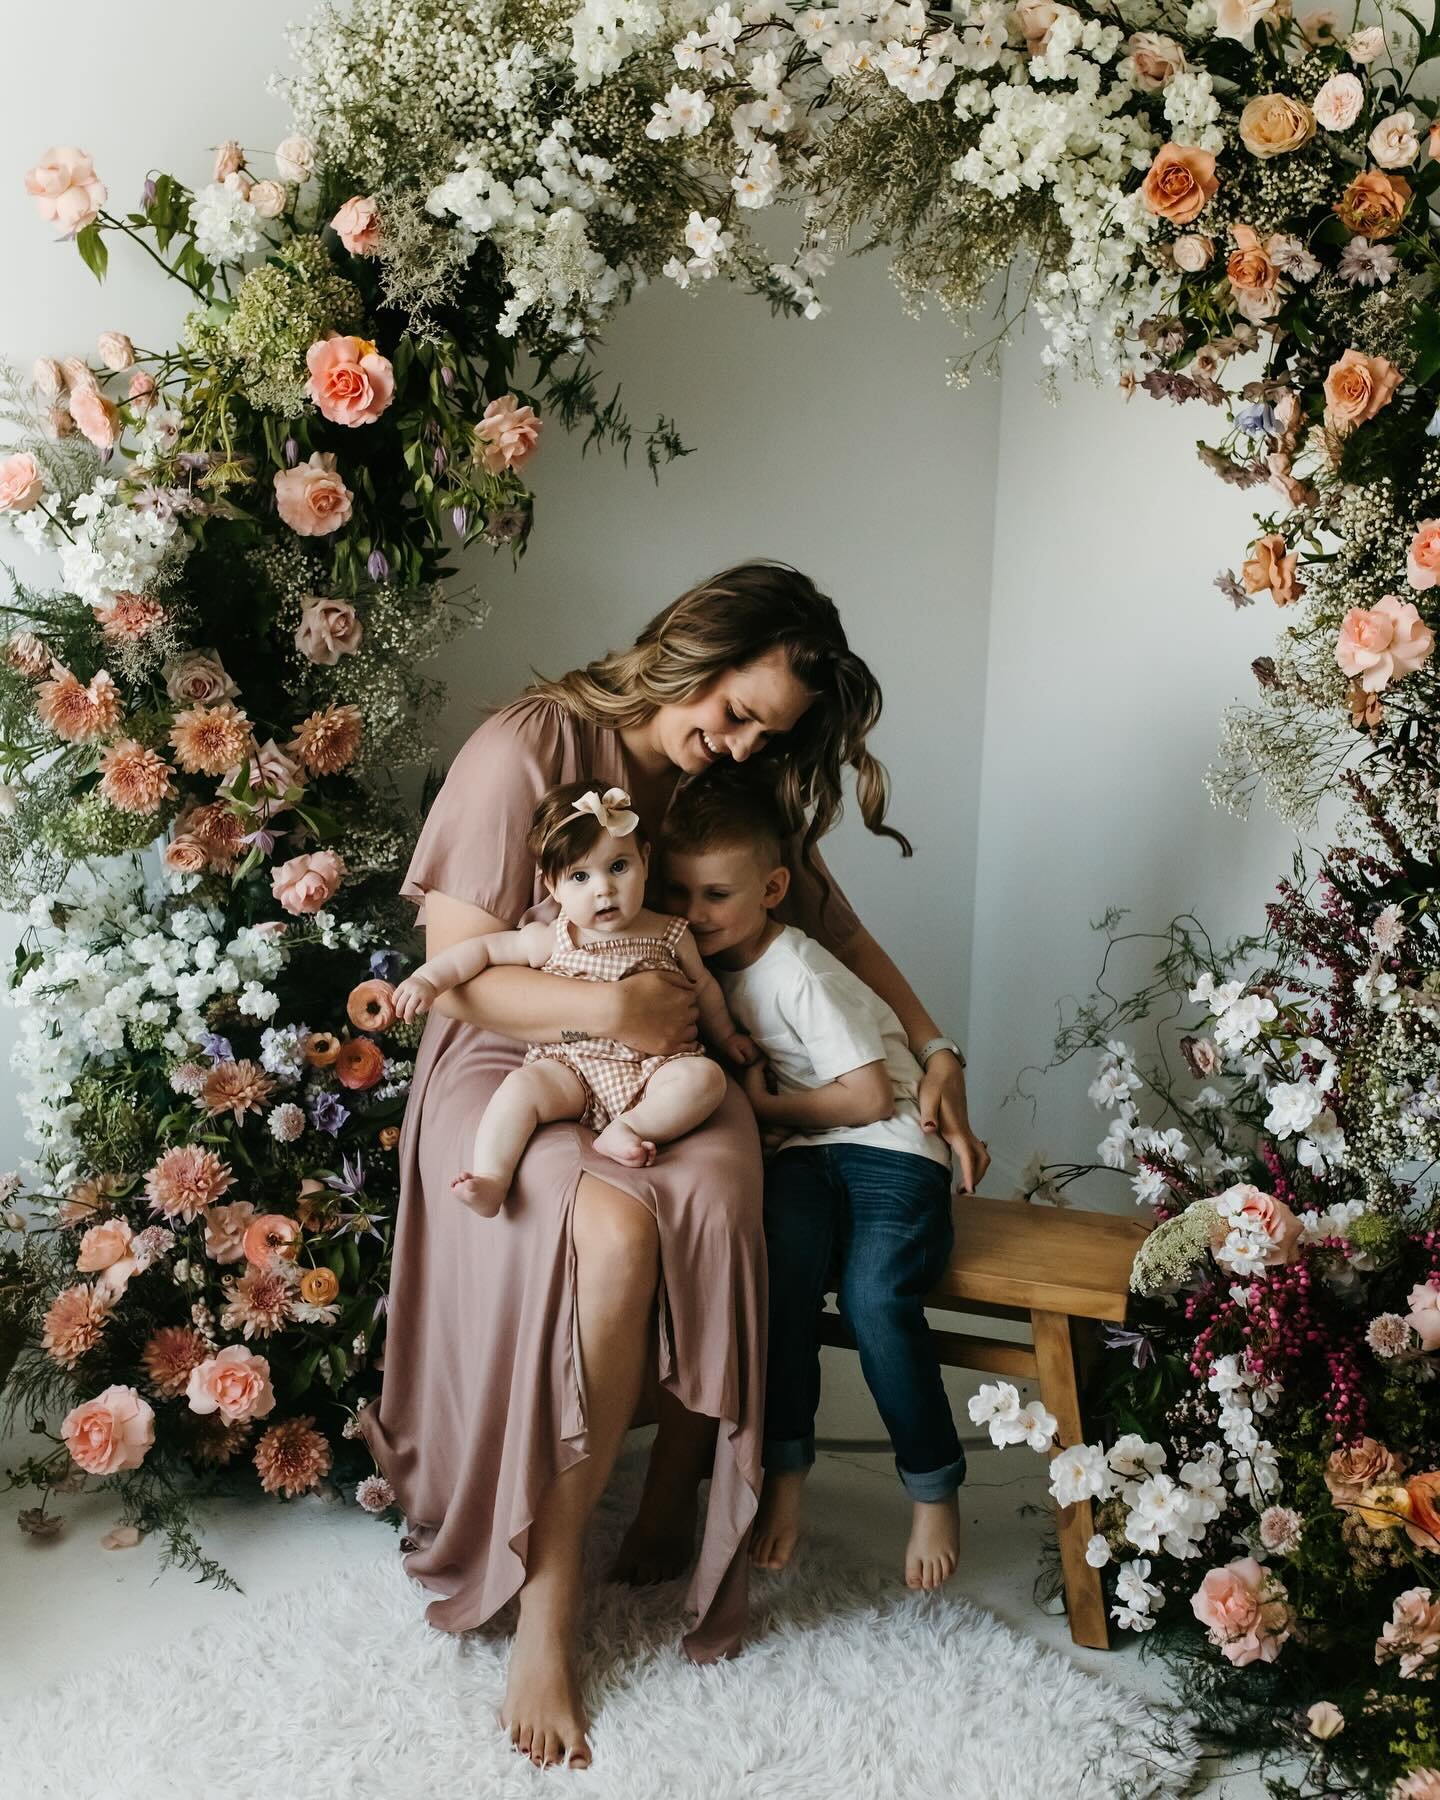 @typeandtimber captured my little loves and me so perfectly 🤍🤍 brb while I go stare at them for the rest of forever 🥹🥹 and also shoutout to @ashleyskeieevents for the incredible floral installation!!